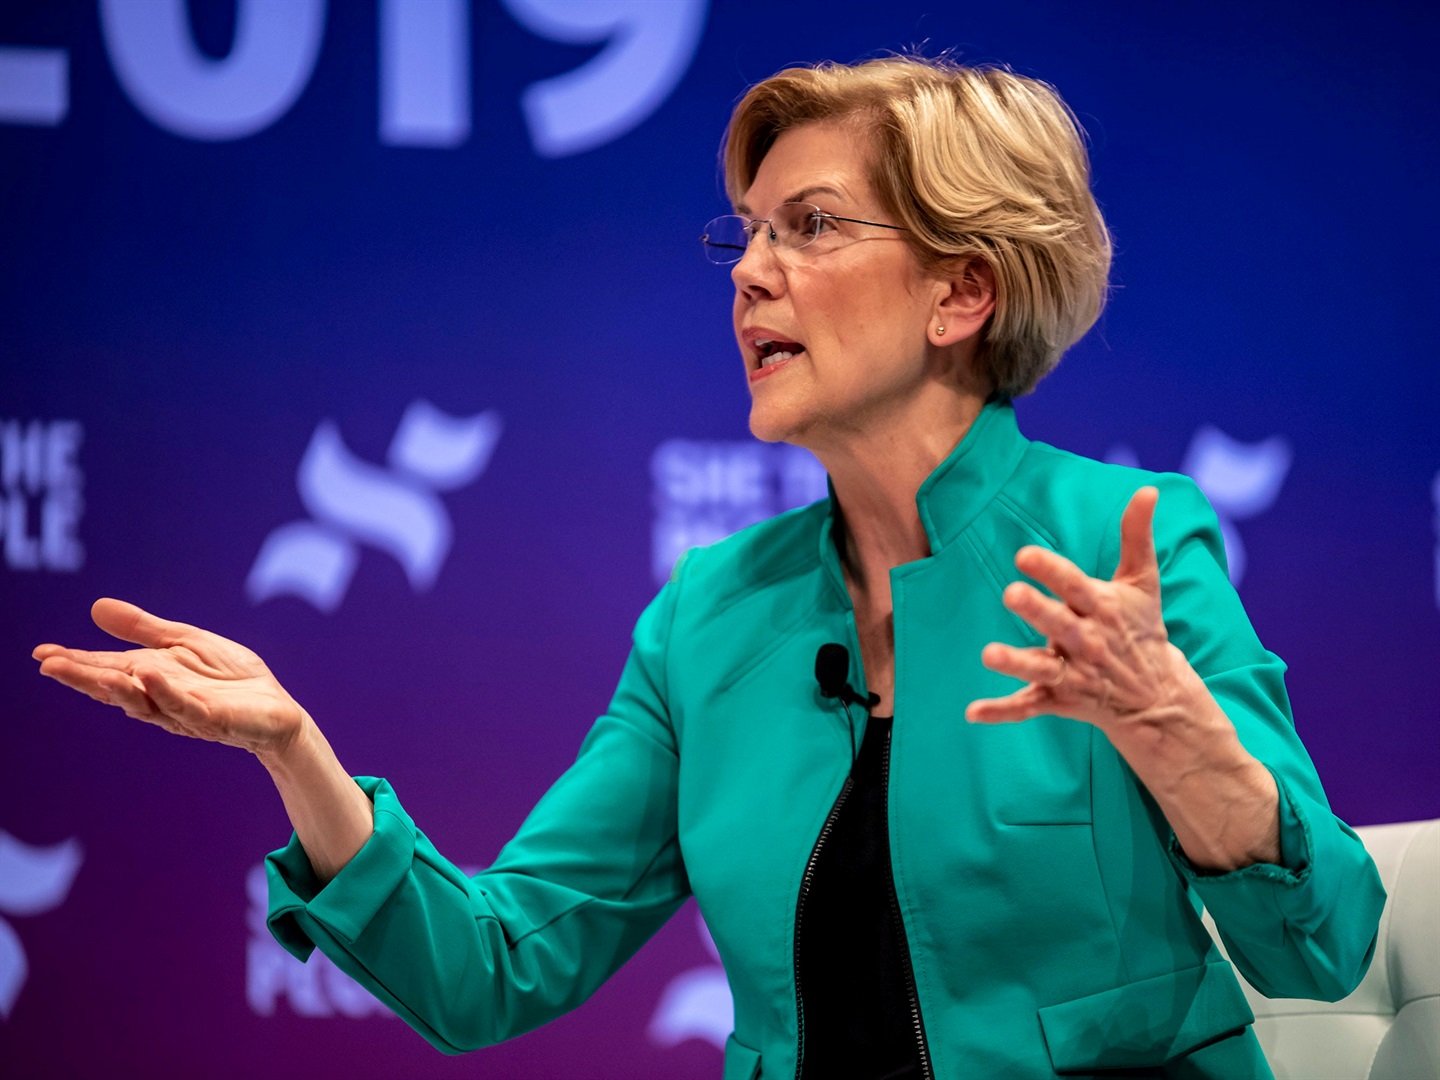 Senator Mitch McConnell once infamously said of Senator Elizabeth Warren: "She was warned. She was given an explanation. Nevertheless, she persisted."  His words later went viral. 